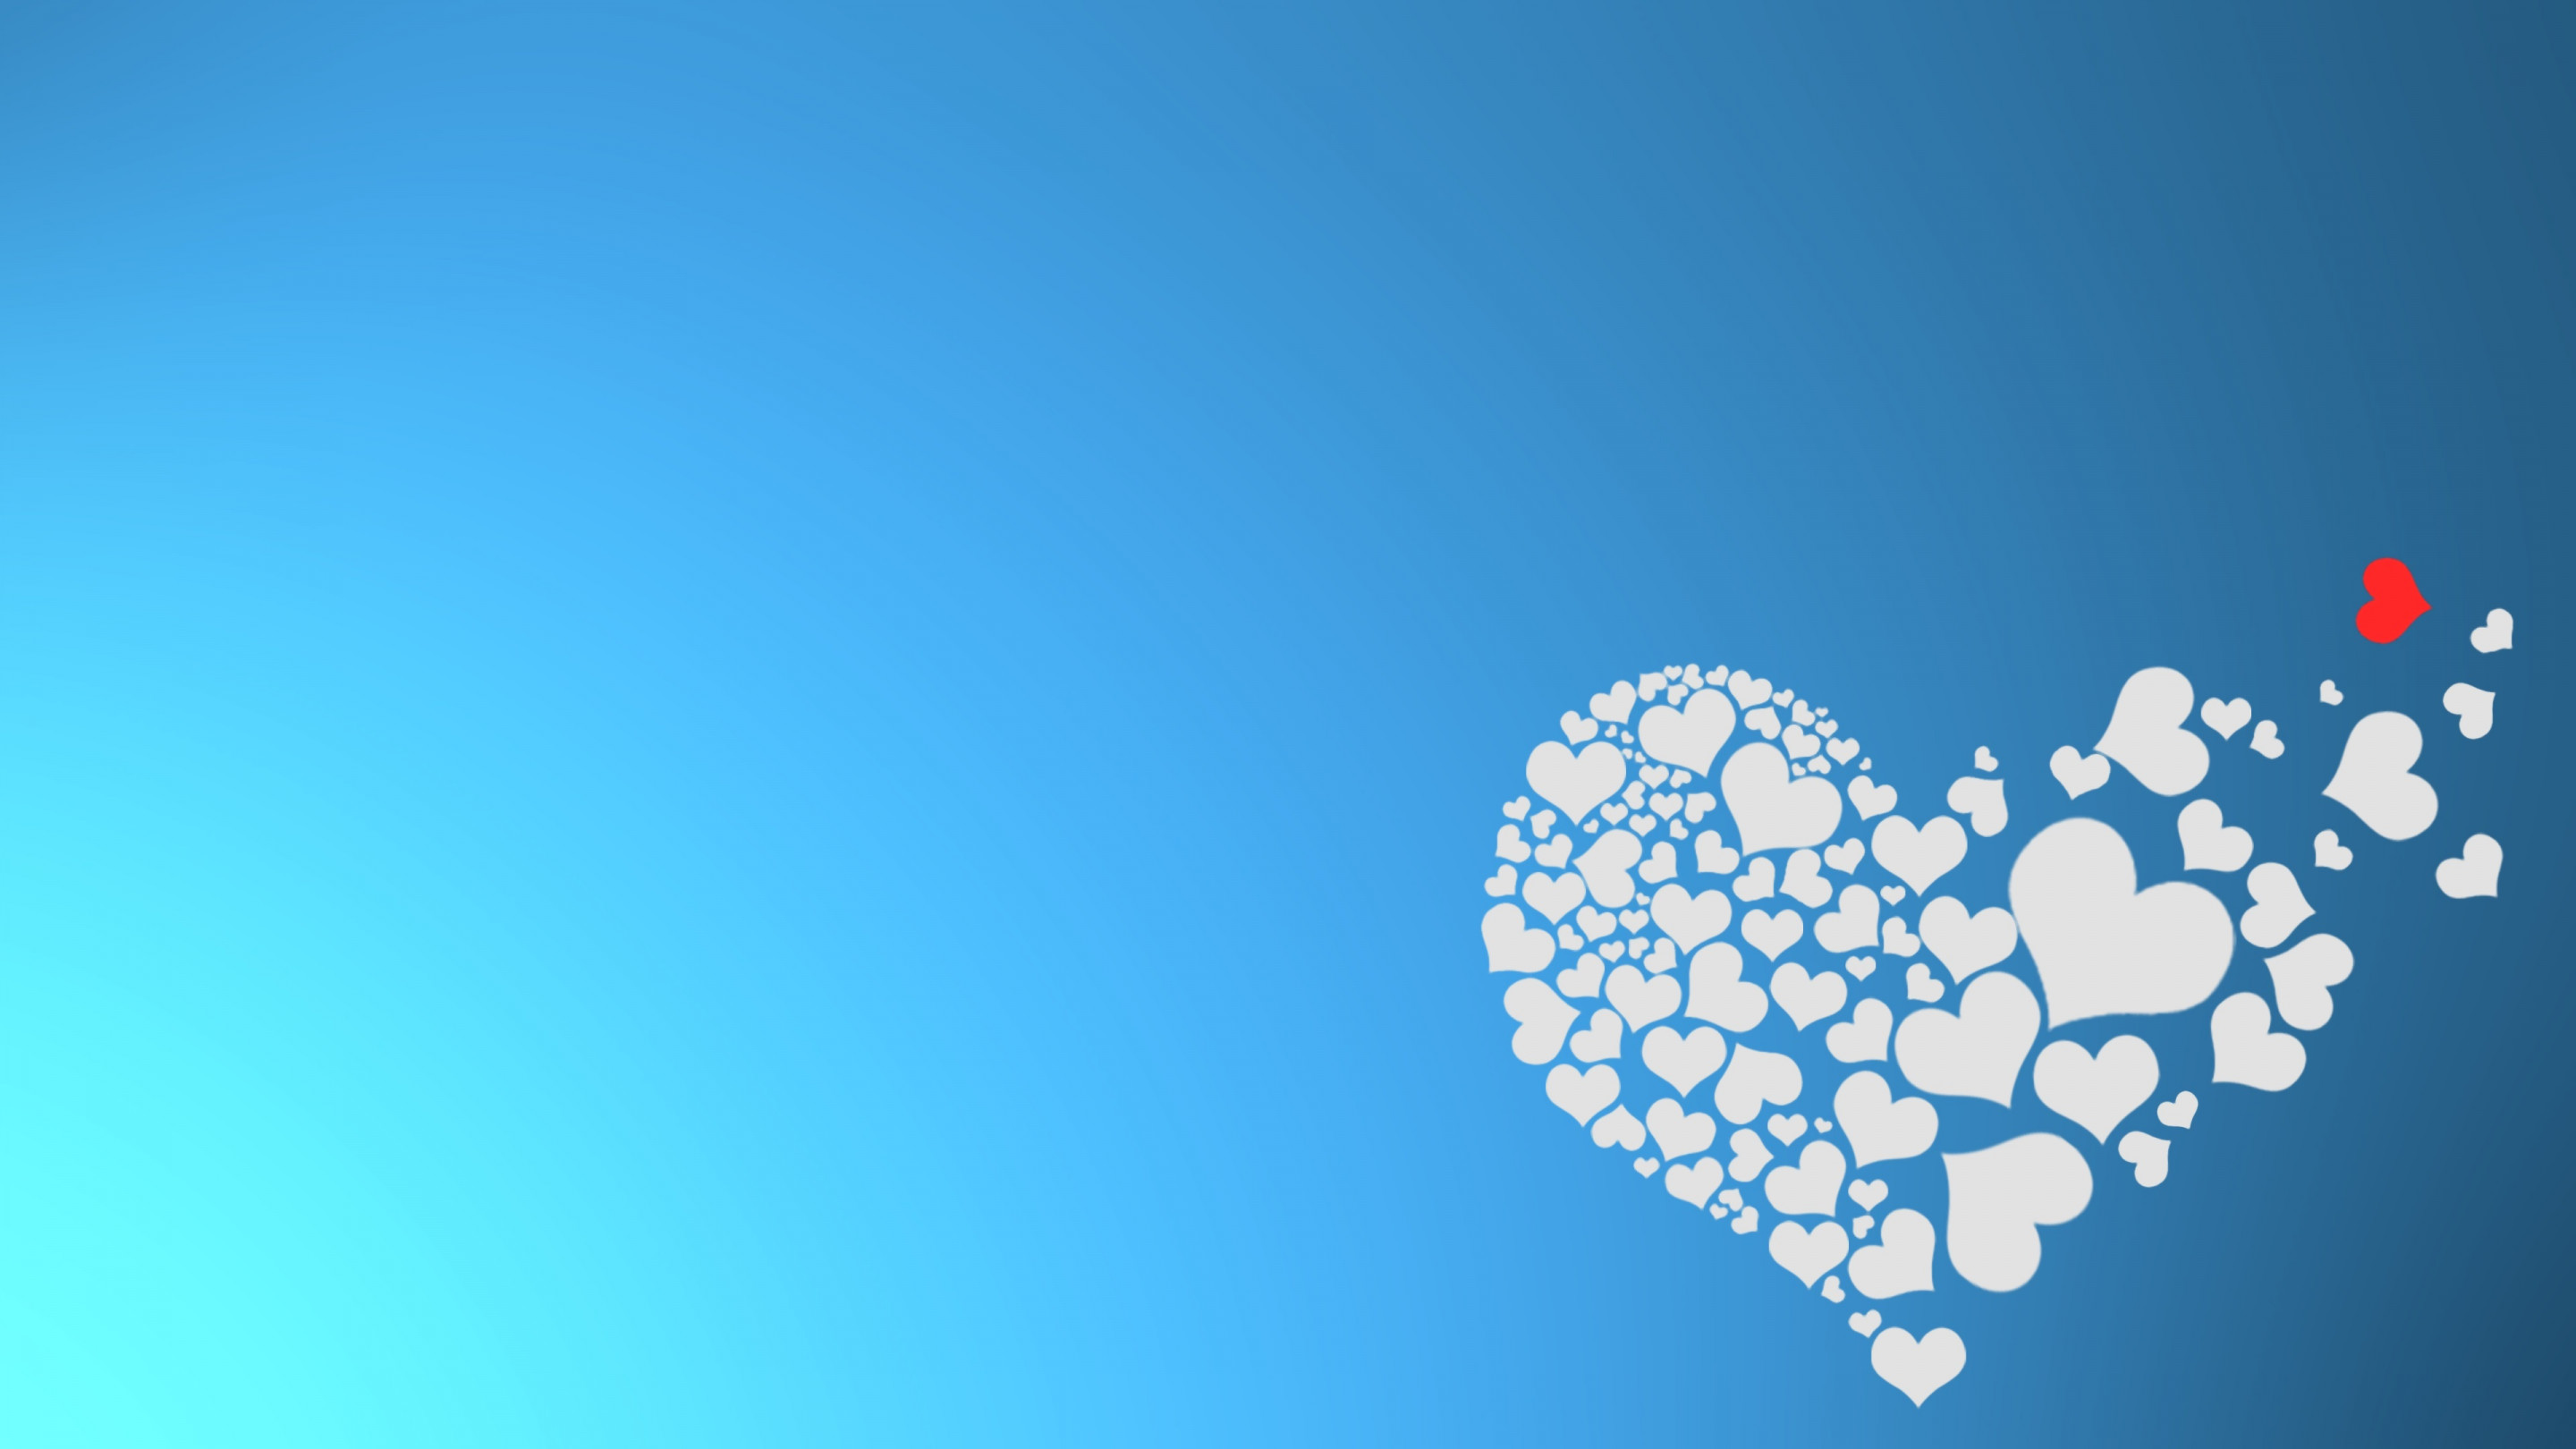 The hearts of love wallpaper 2880x1620